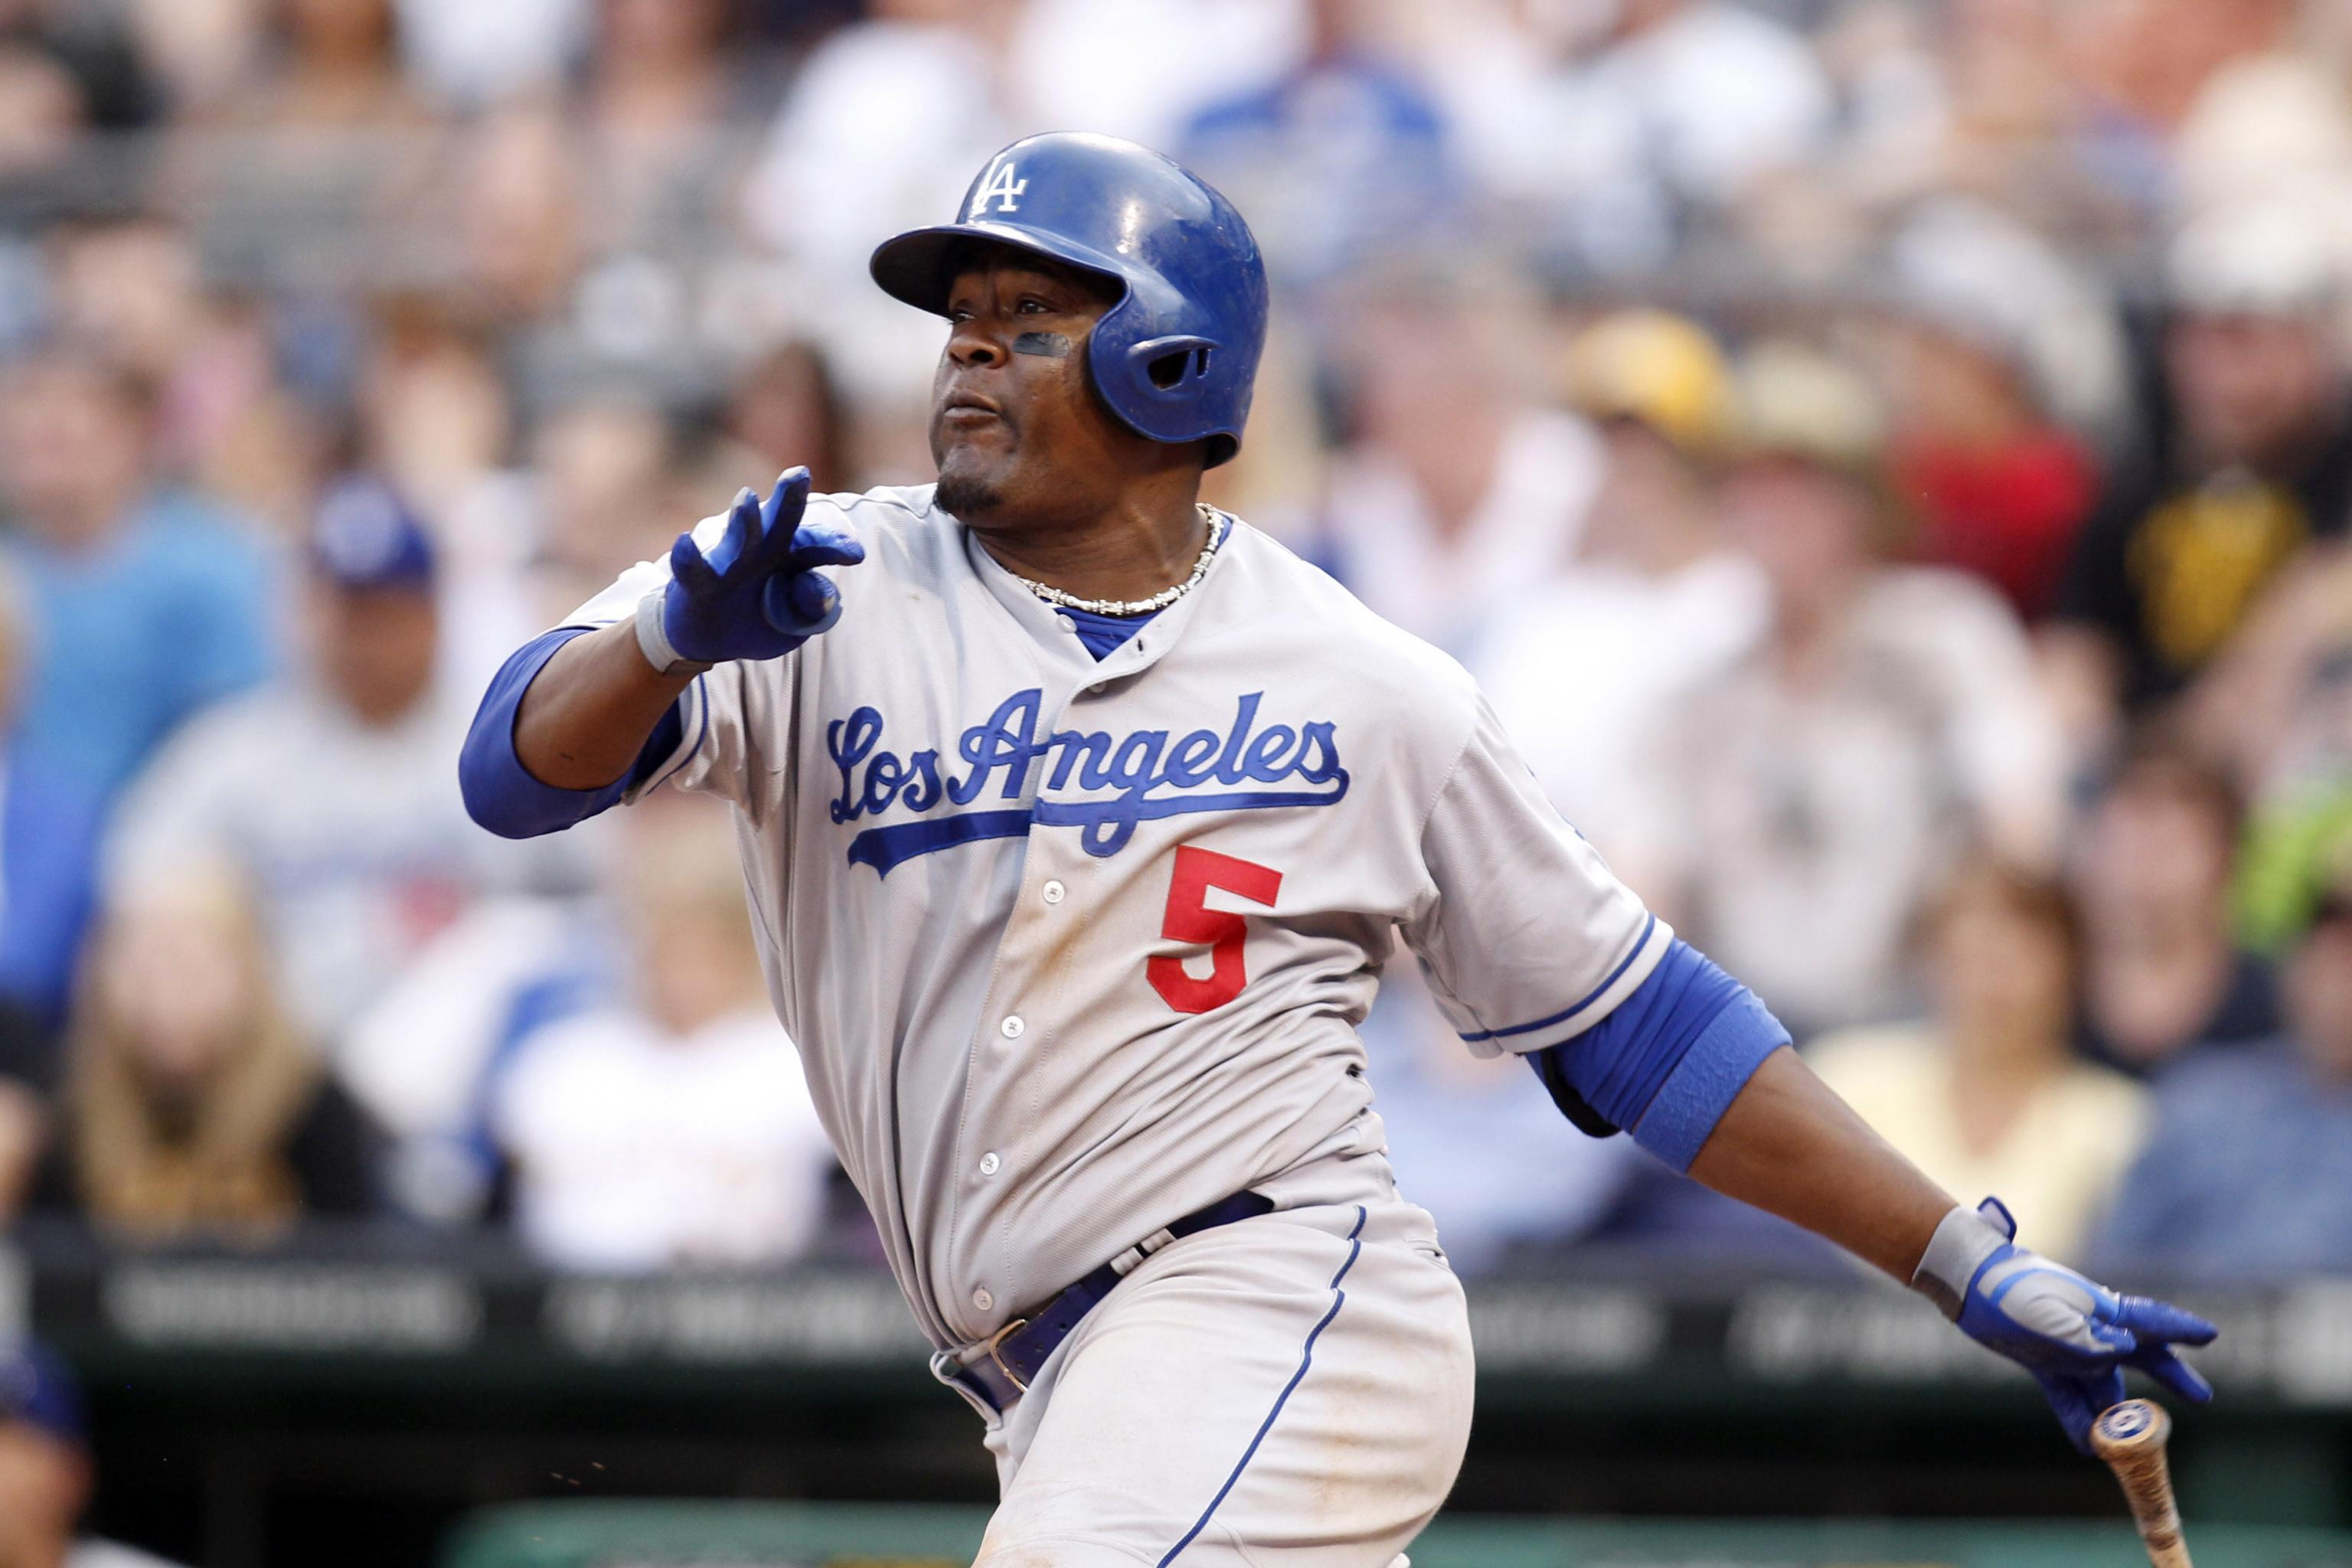 Son of Dodgers fan favorite Juan Uribe looks just like his dad at short